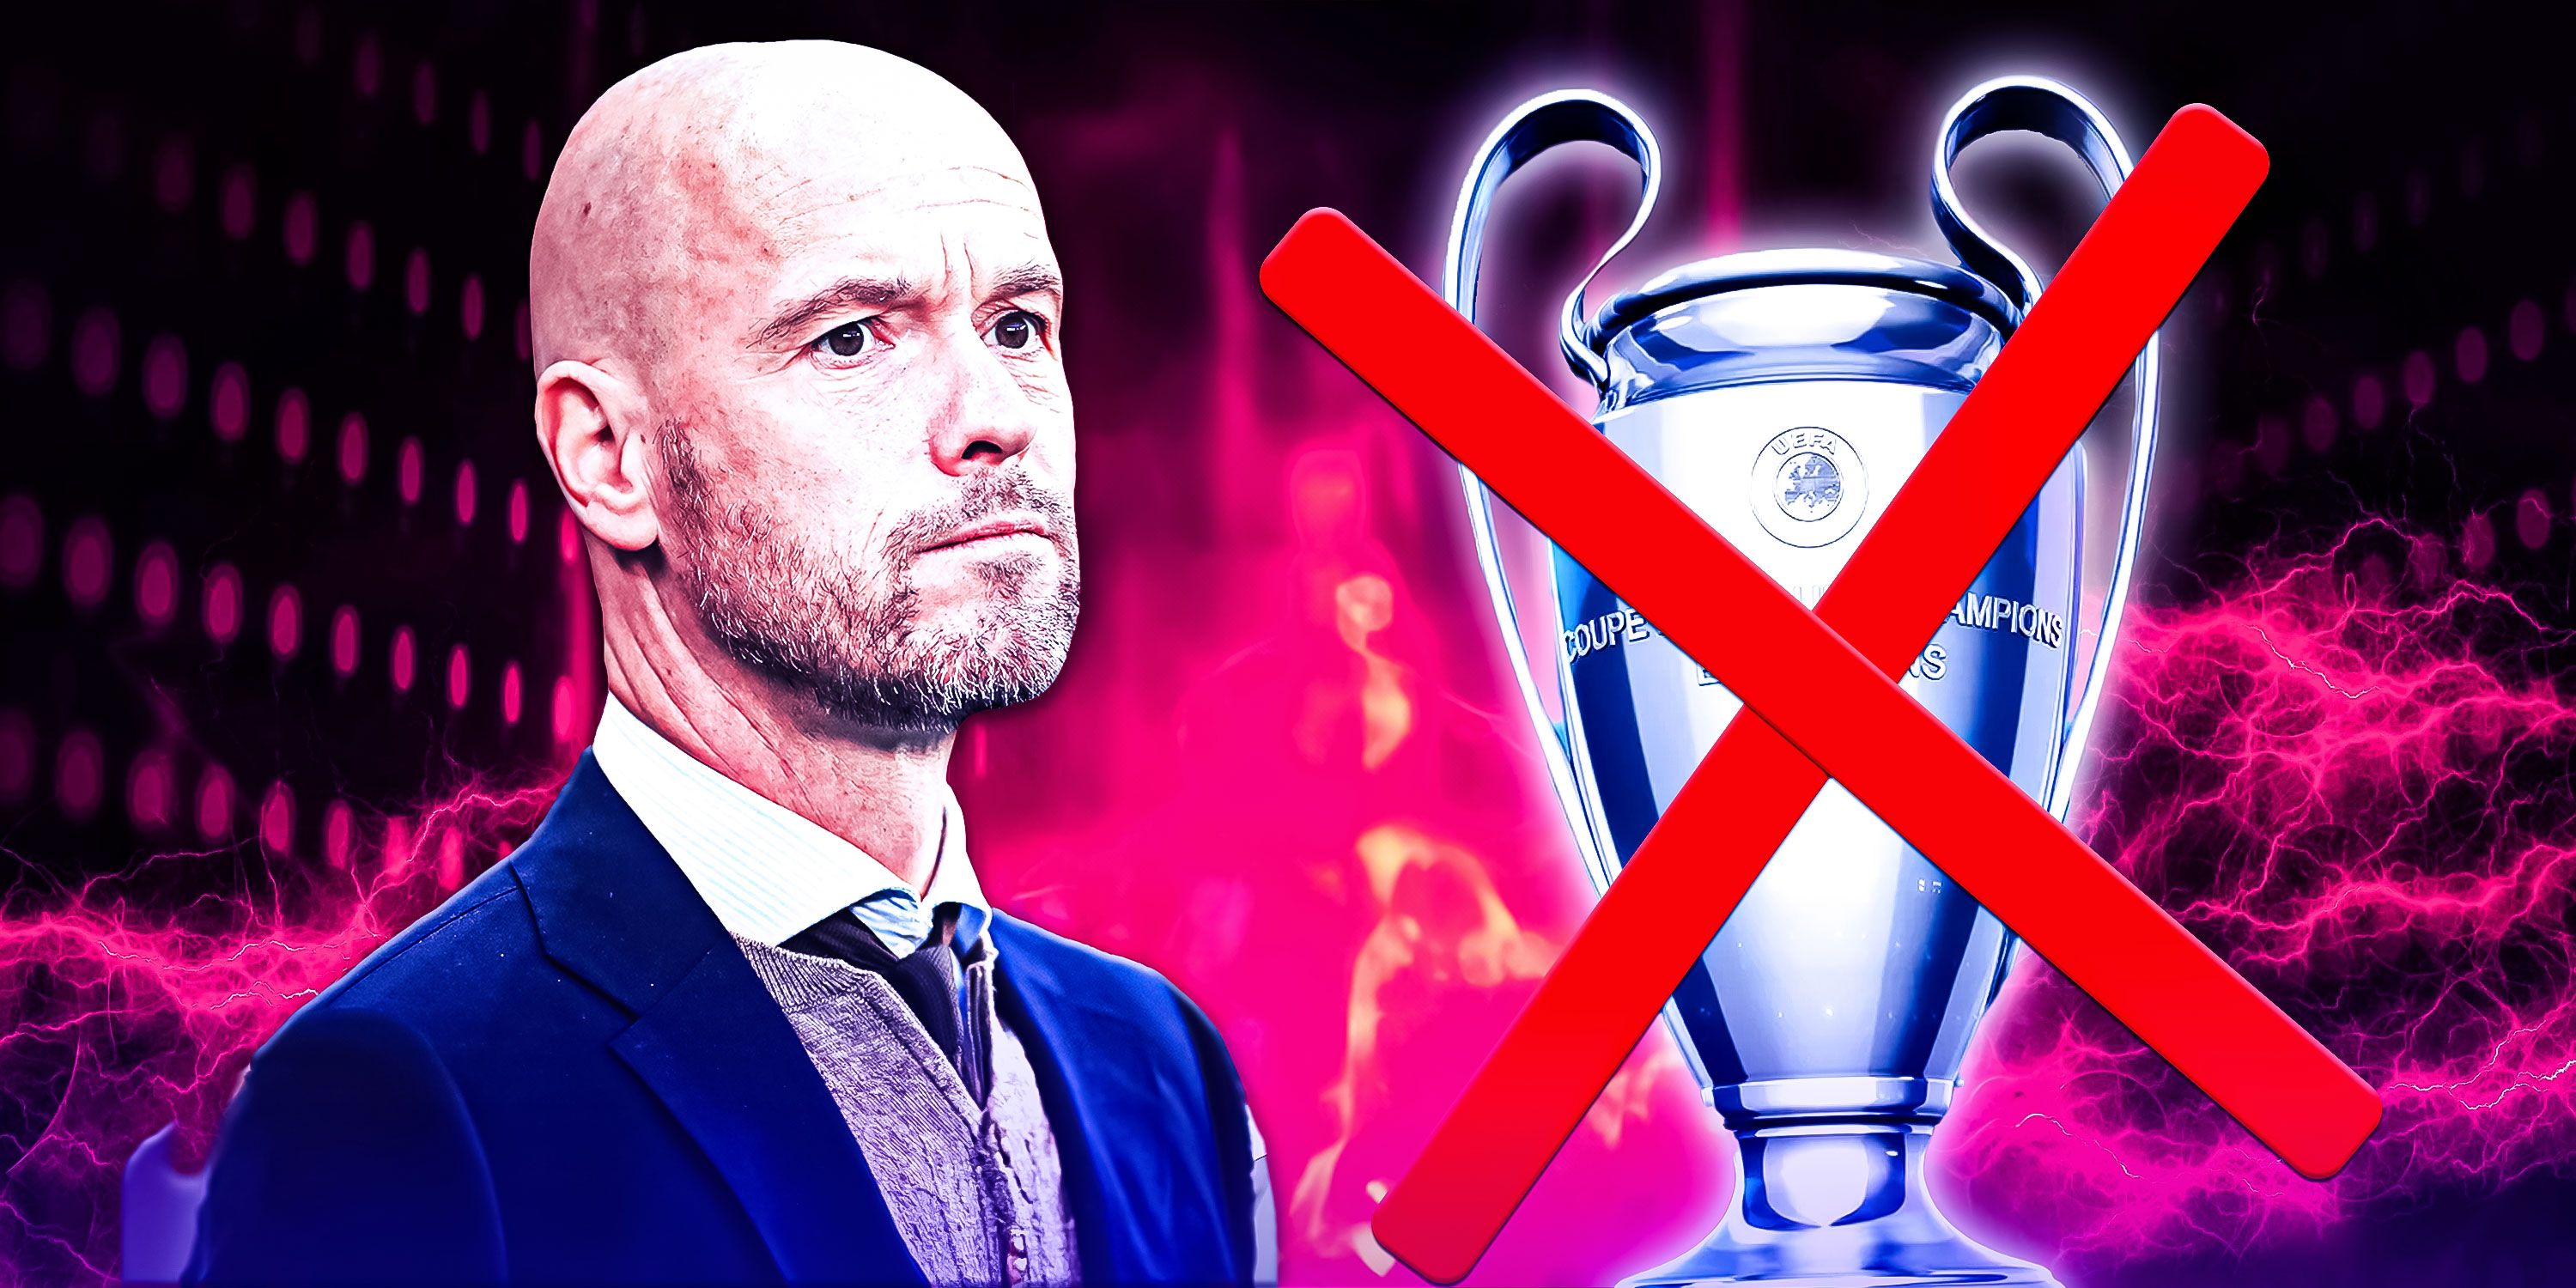 How-Manchester-United-Could-be-Banned-From-Europe-in-202425